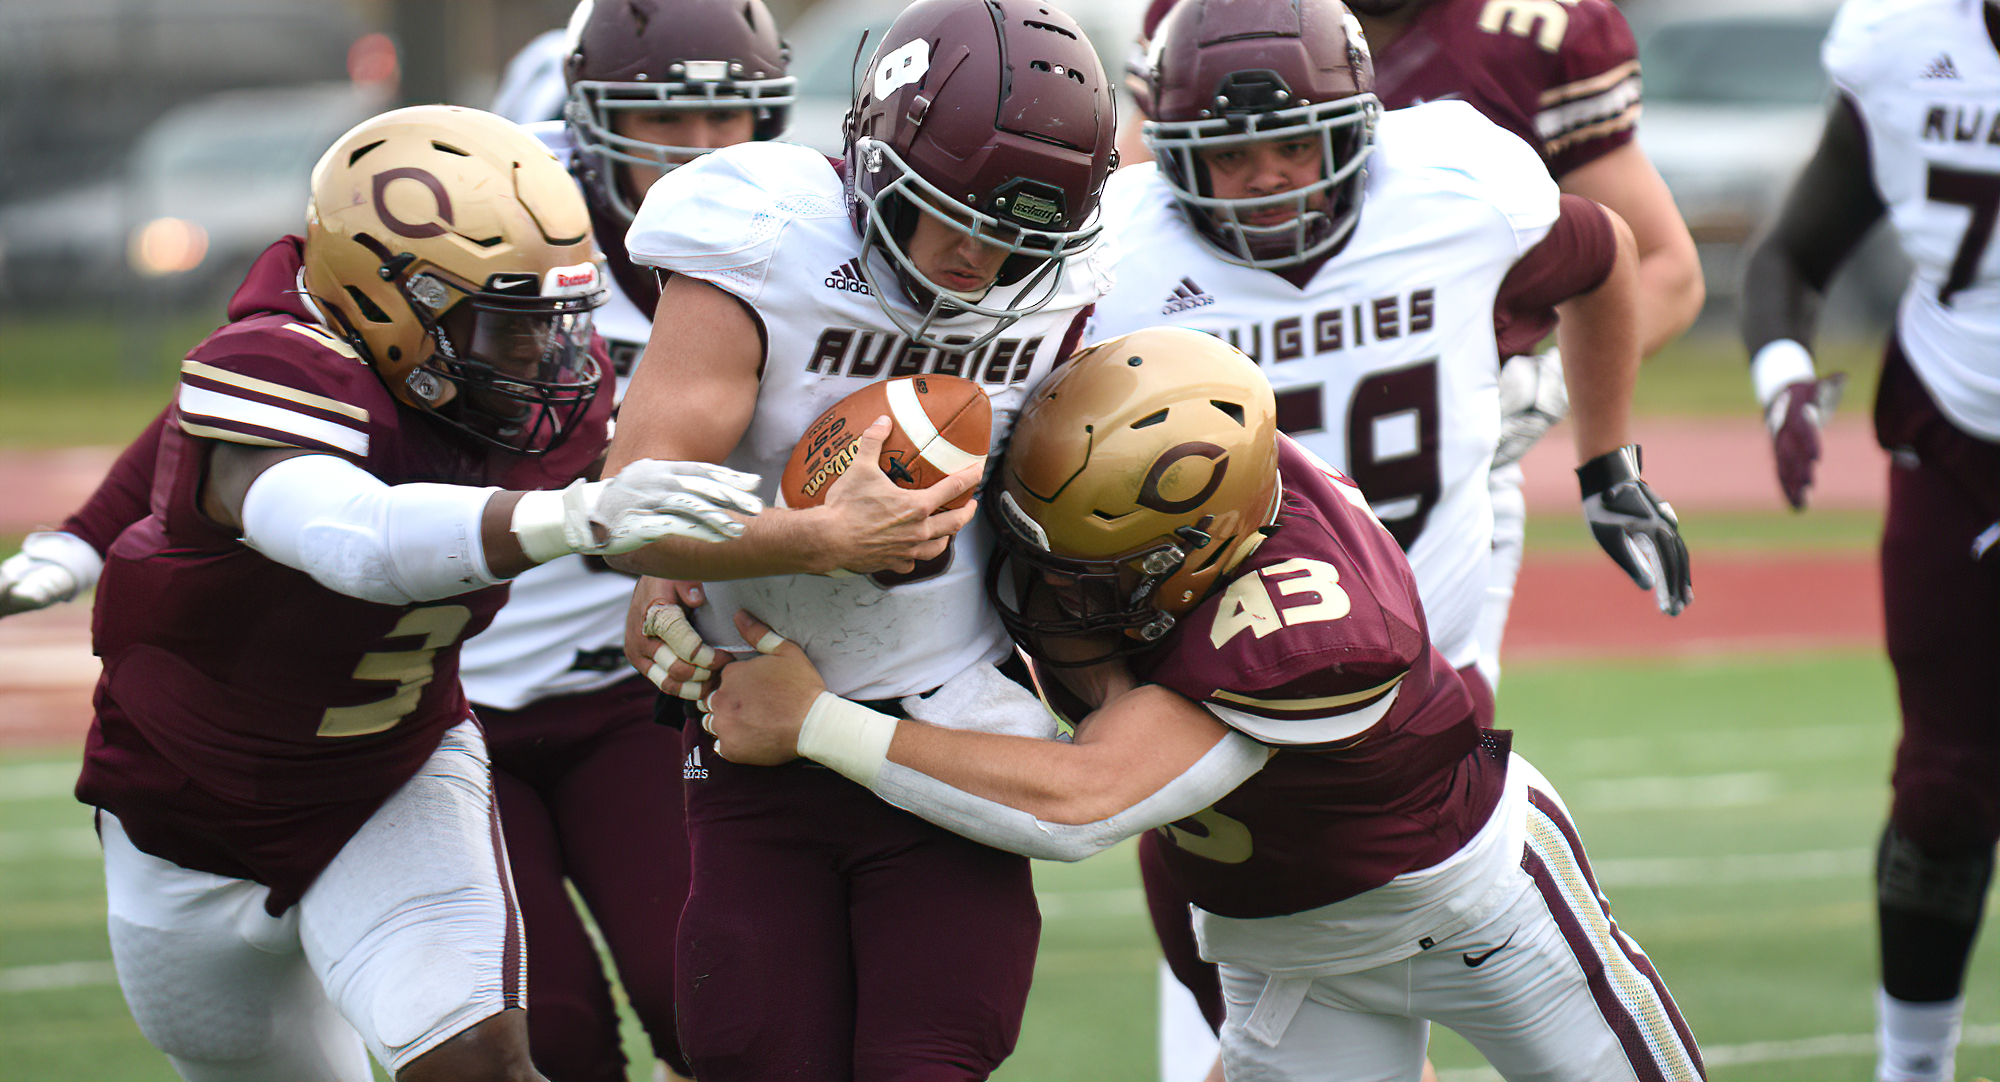 Seniors Rob Lestrick (#3) and Noah Jenson (#43) bring down the Augsburg quarterback for one of the team's seven sacks on the day.